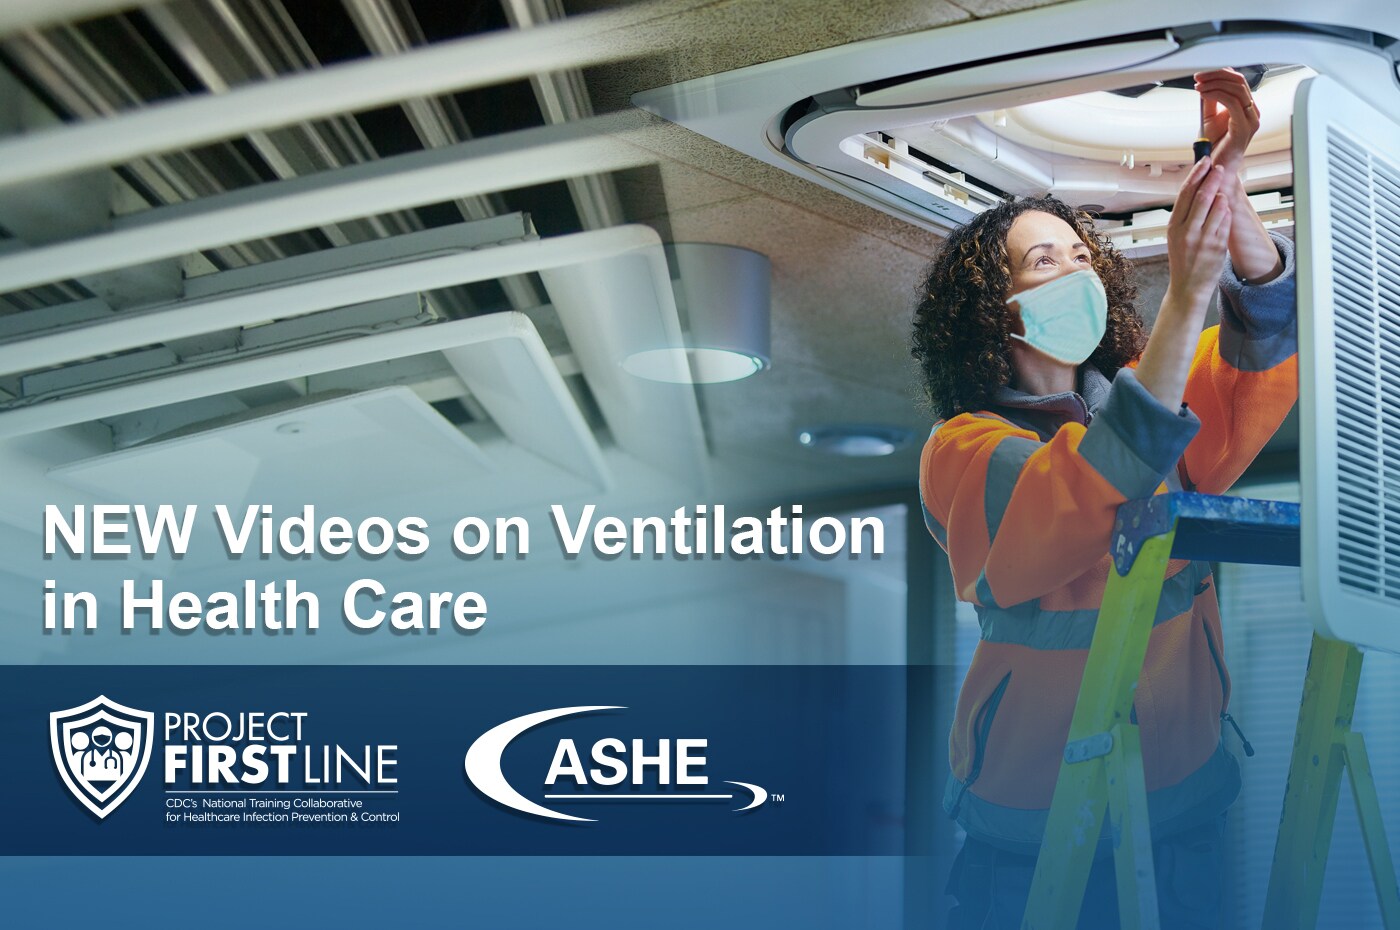 ventilation in healthcare settings videos from the American Society for Health Care Engineering